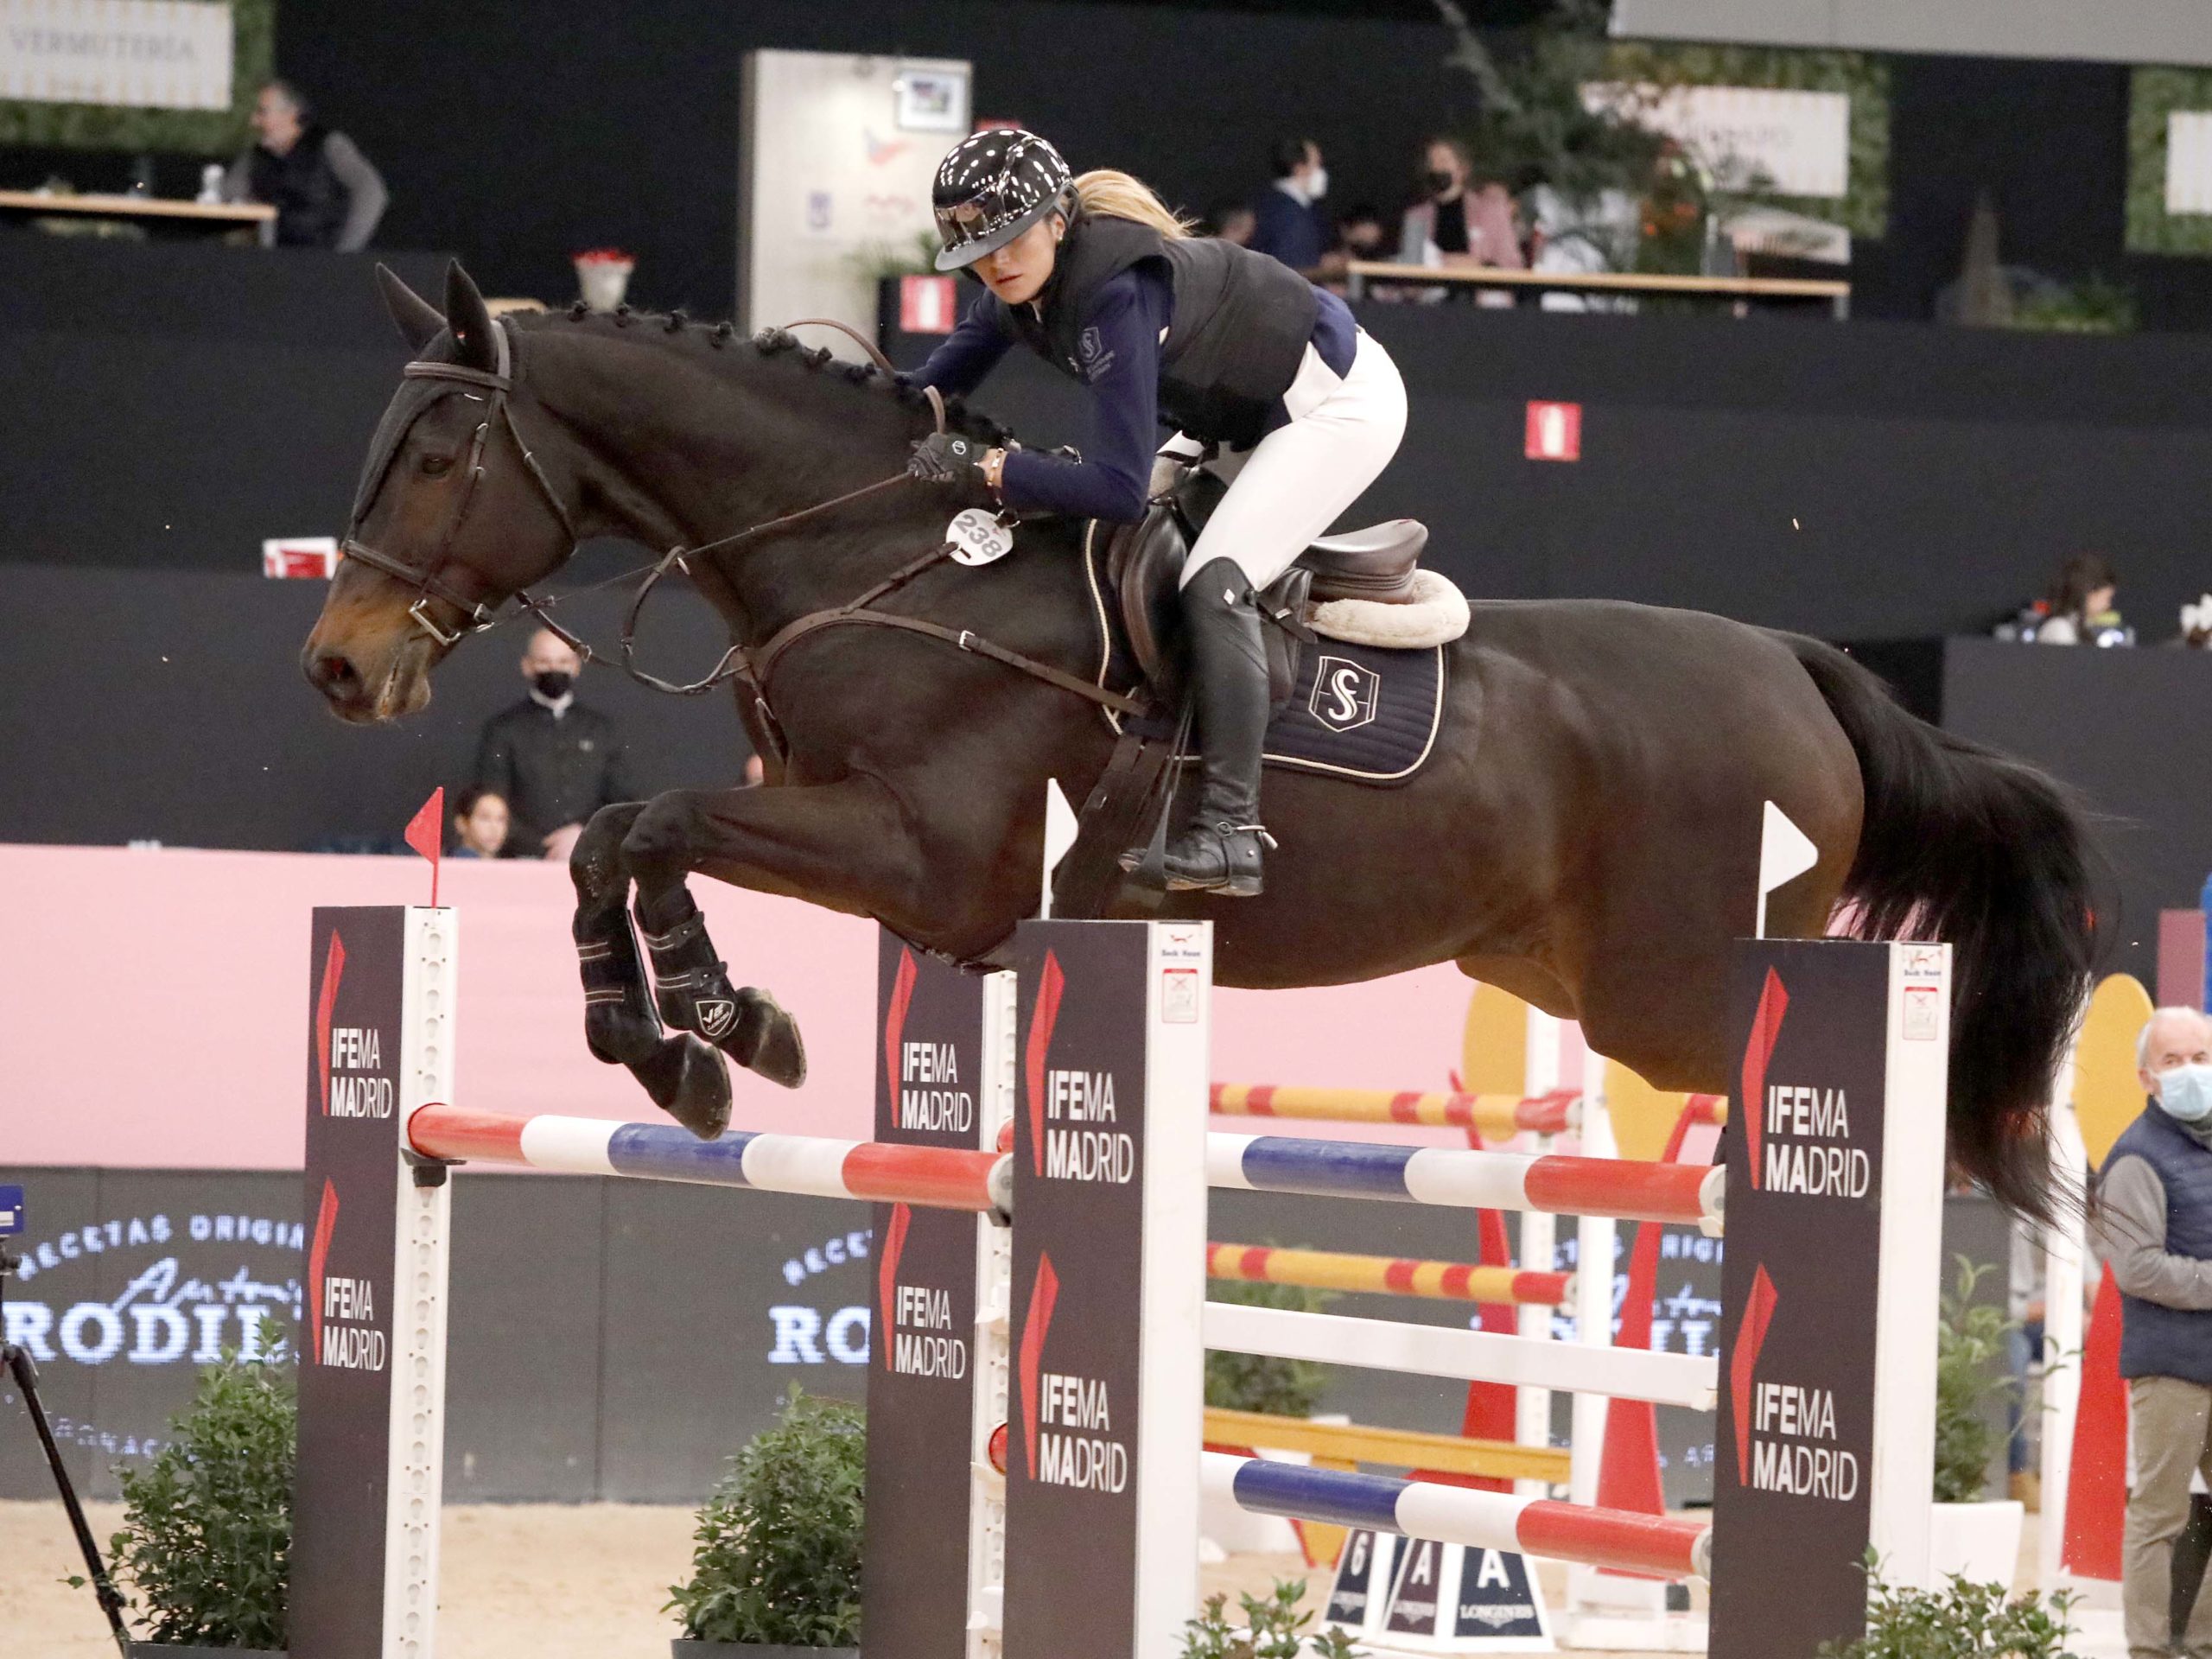 Carolina Villanueva sets the pace at the start of the second day of IFEMA Madrid Horse Week